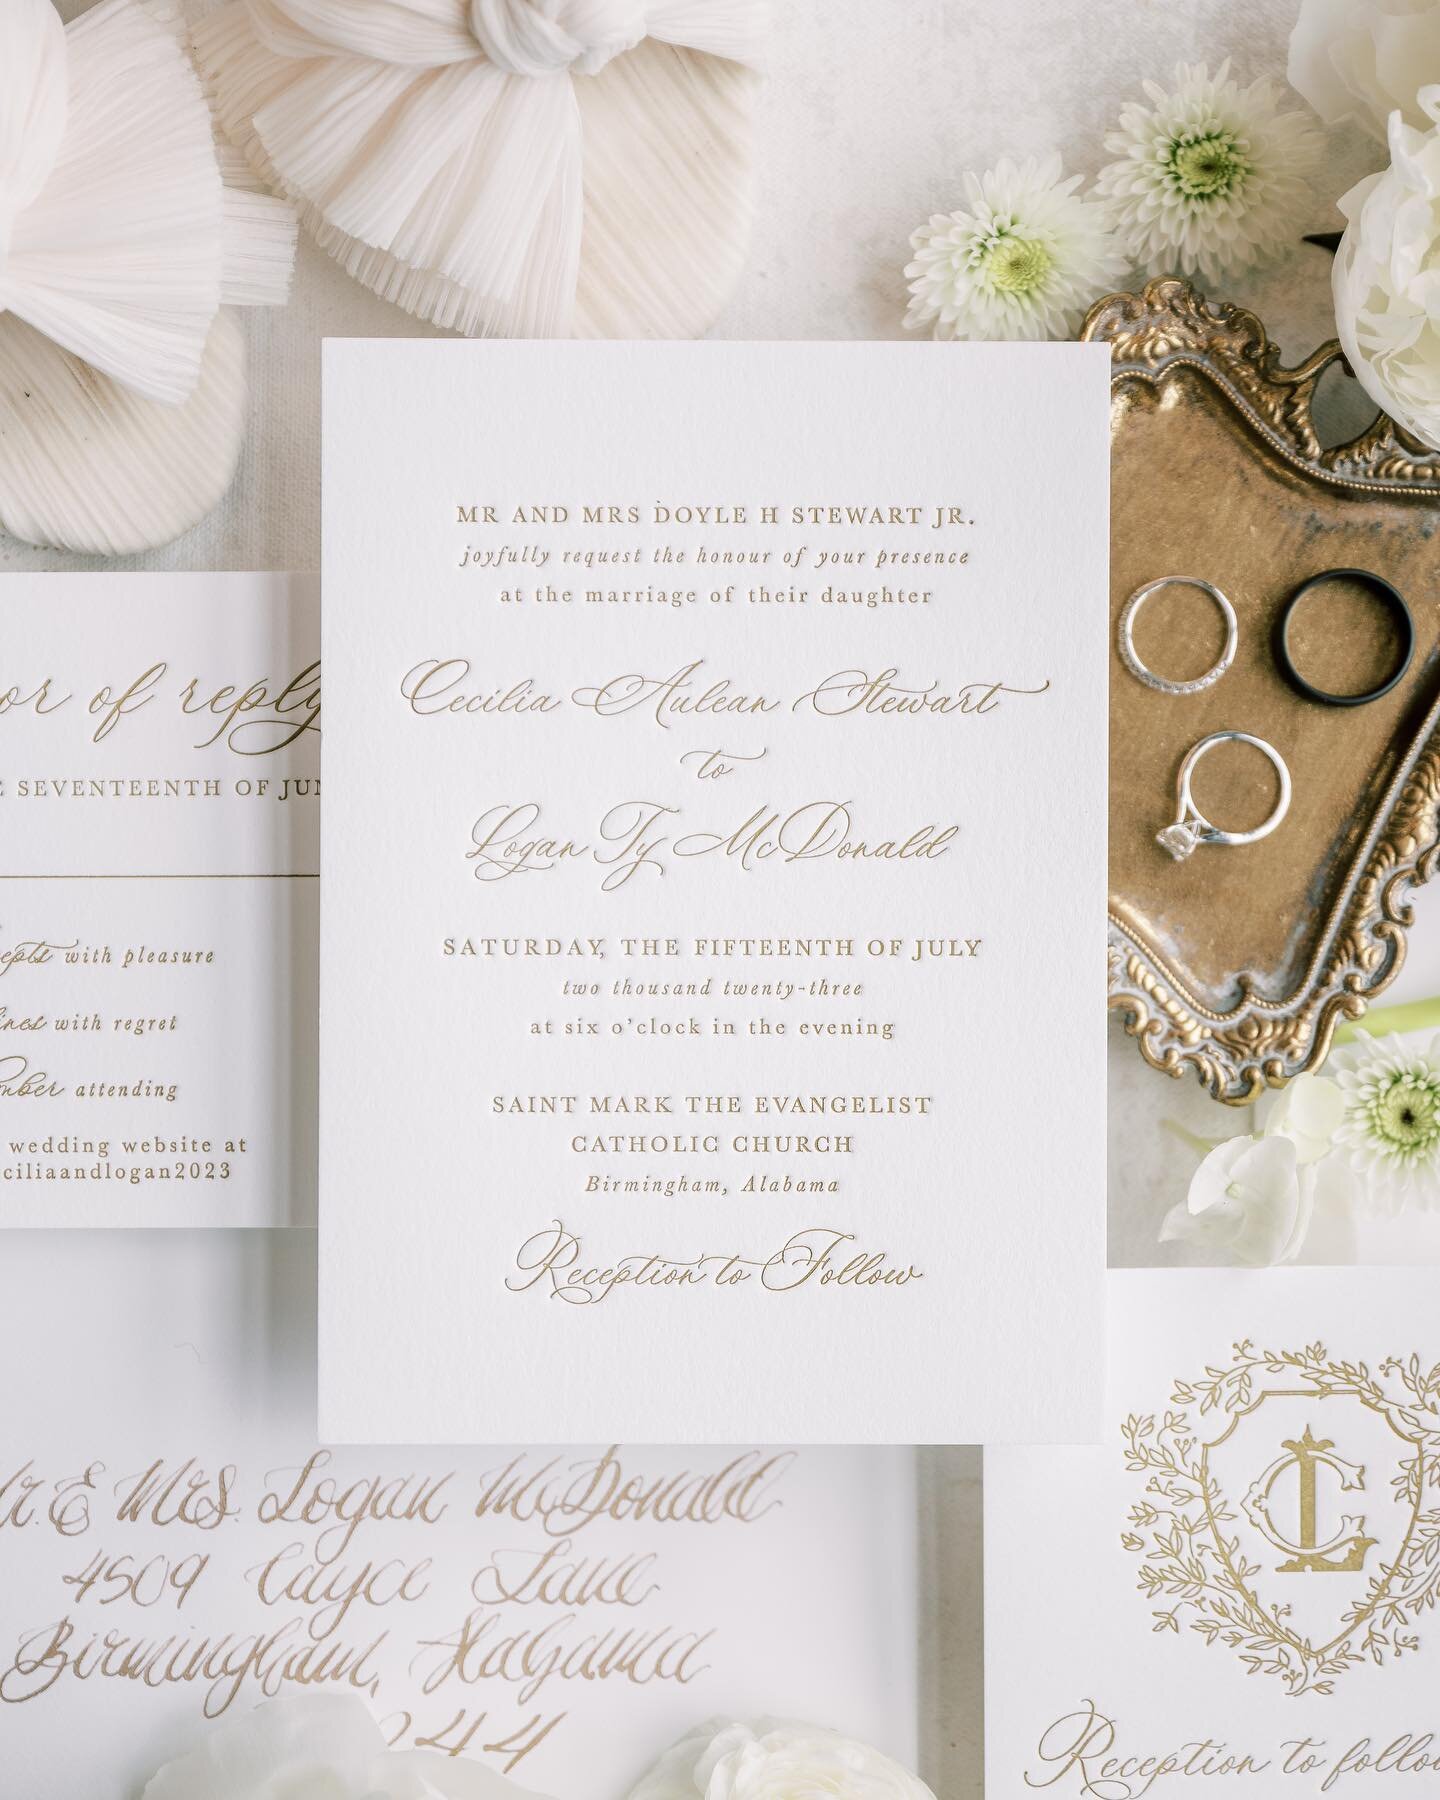 nothing better than a pretty invitation suite inviting all your favorite people to celebrate your wedding 💌